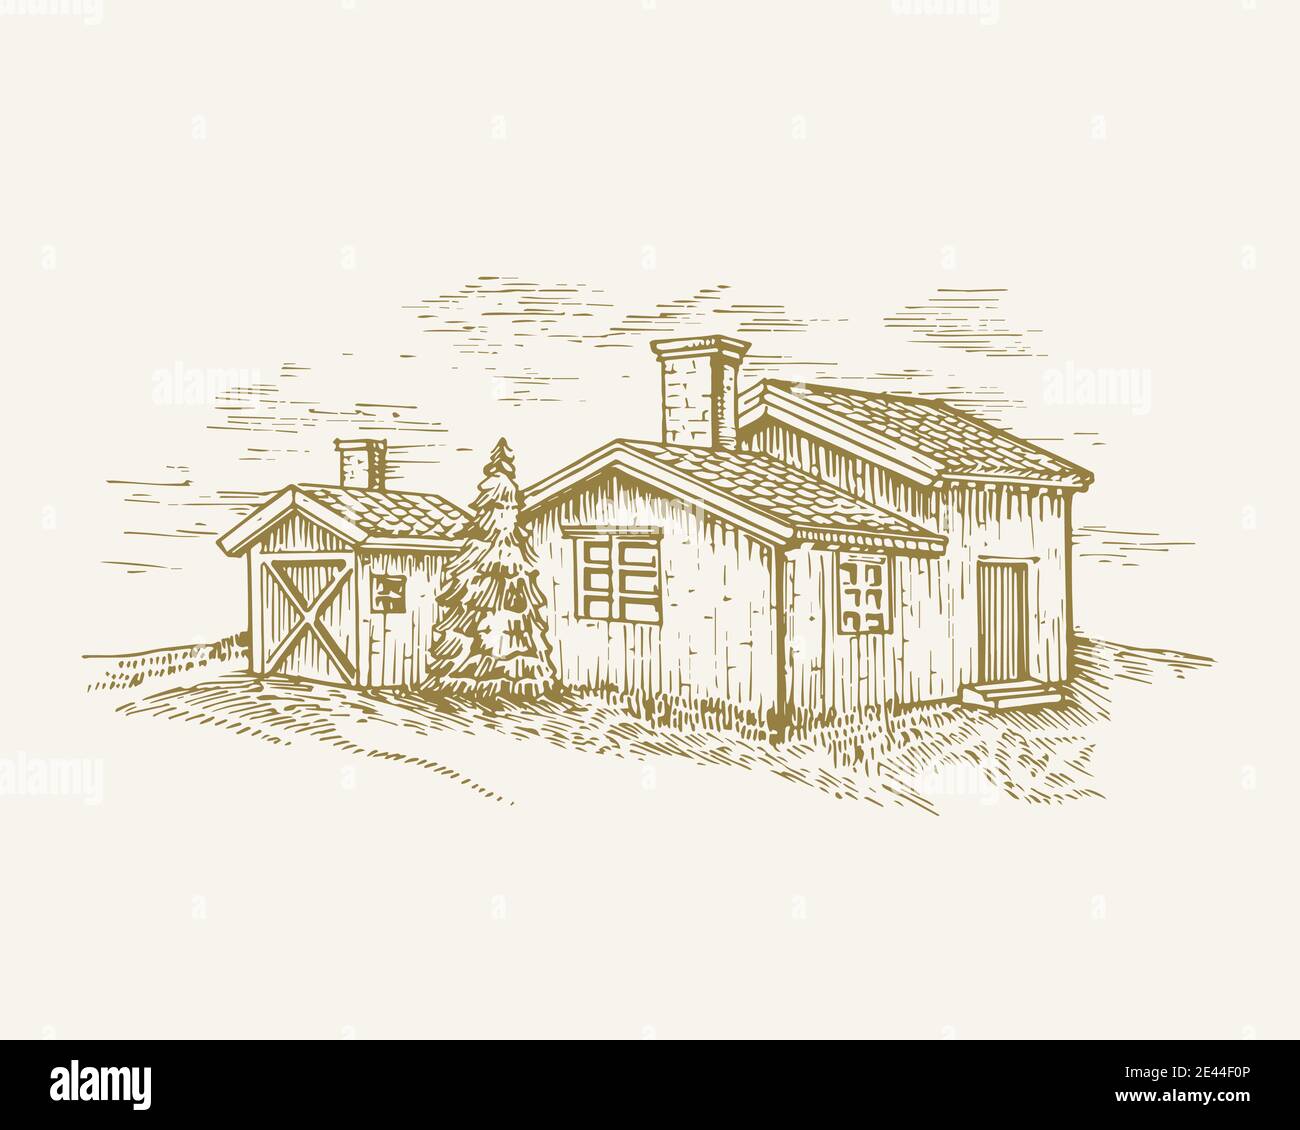 Hand Drawn Rural Buildings Landscape Vector Illustration. Farm with Barns and Pine Tree Sketch. Village Houses Doodle. Isolated Stock Vector